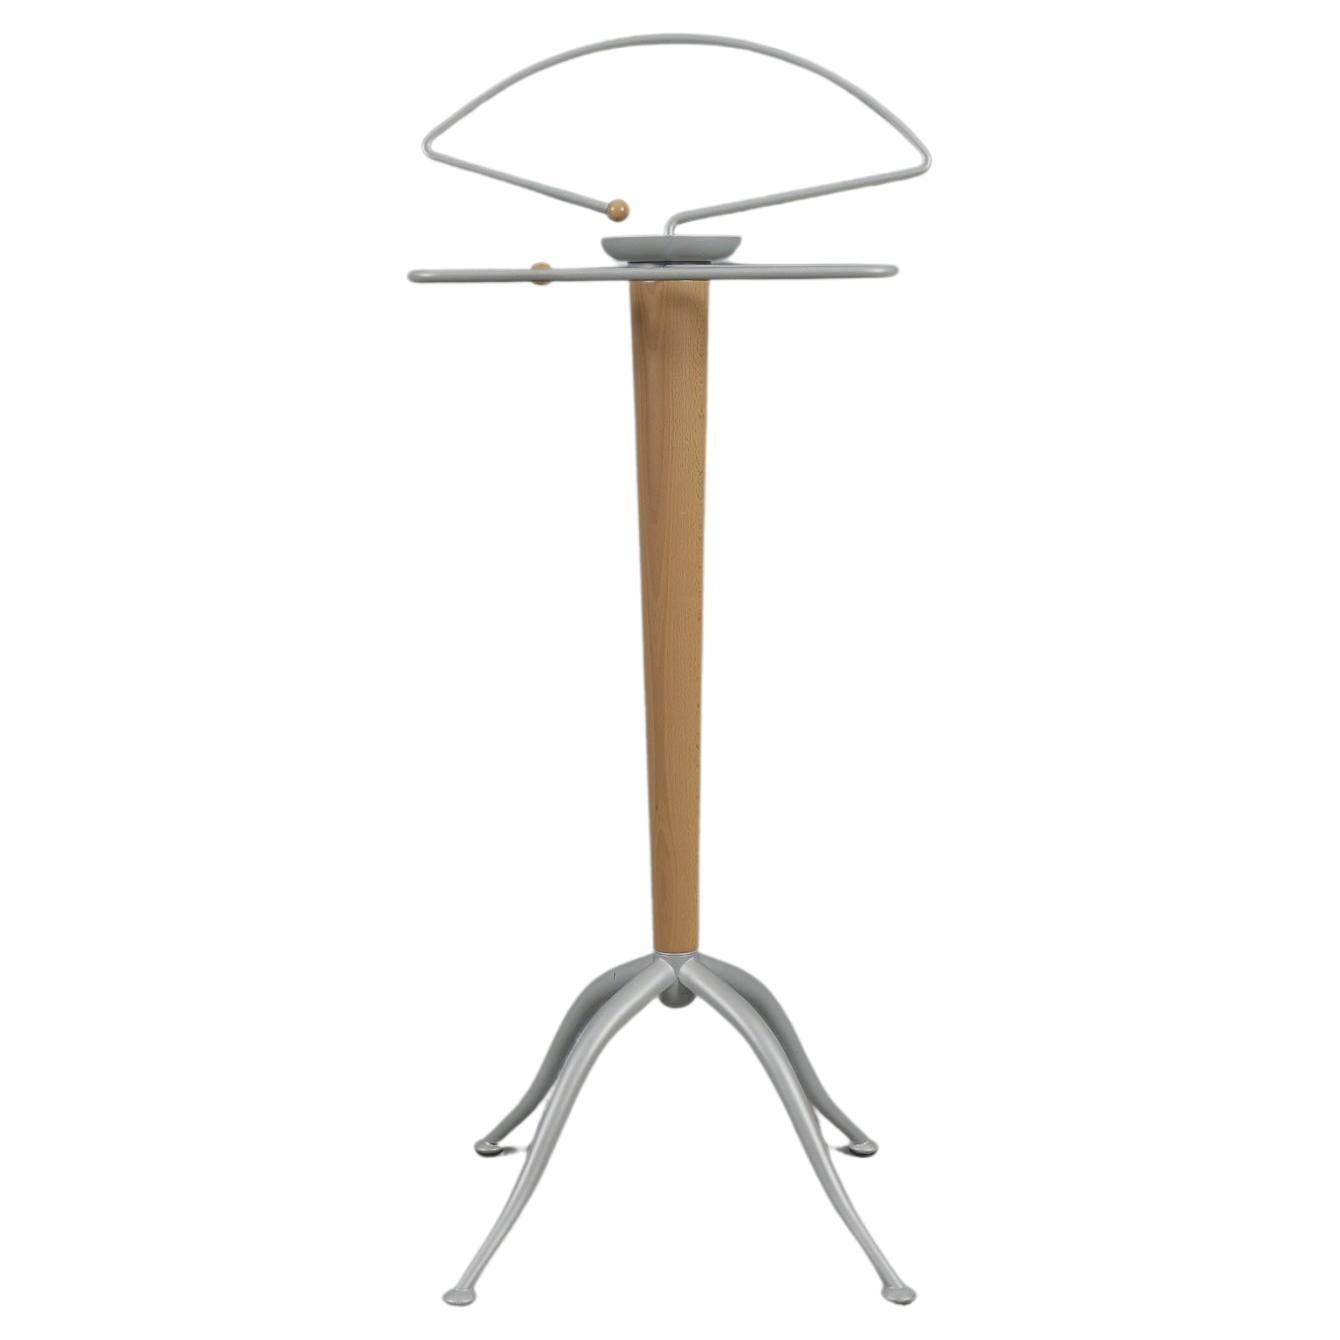 Italian Postmodern Calligaris Valet Stand, Made in Italy 1980s